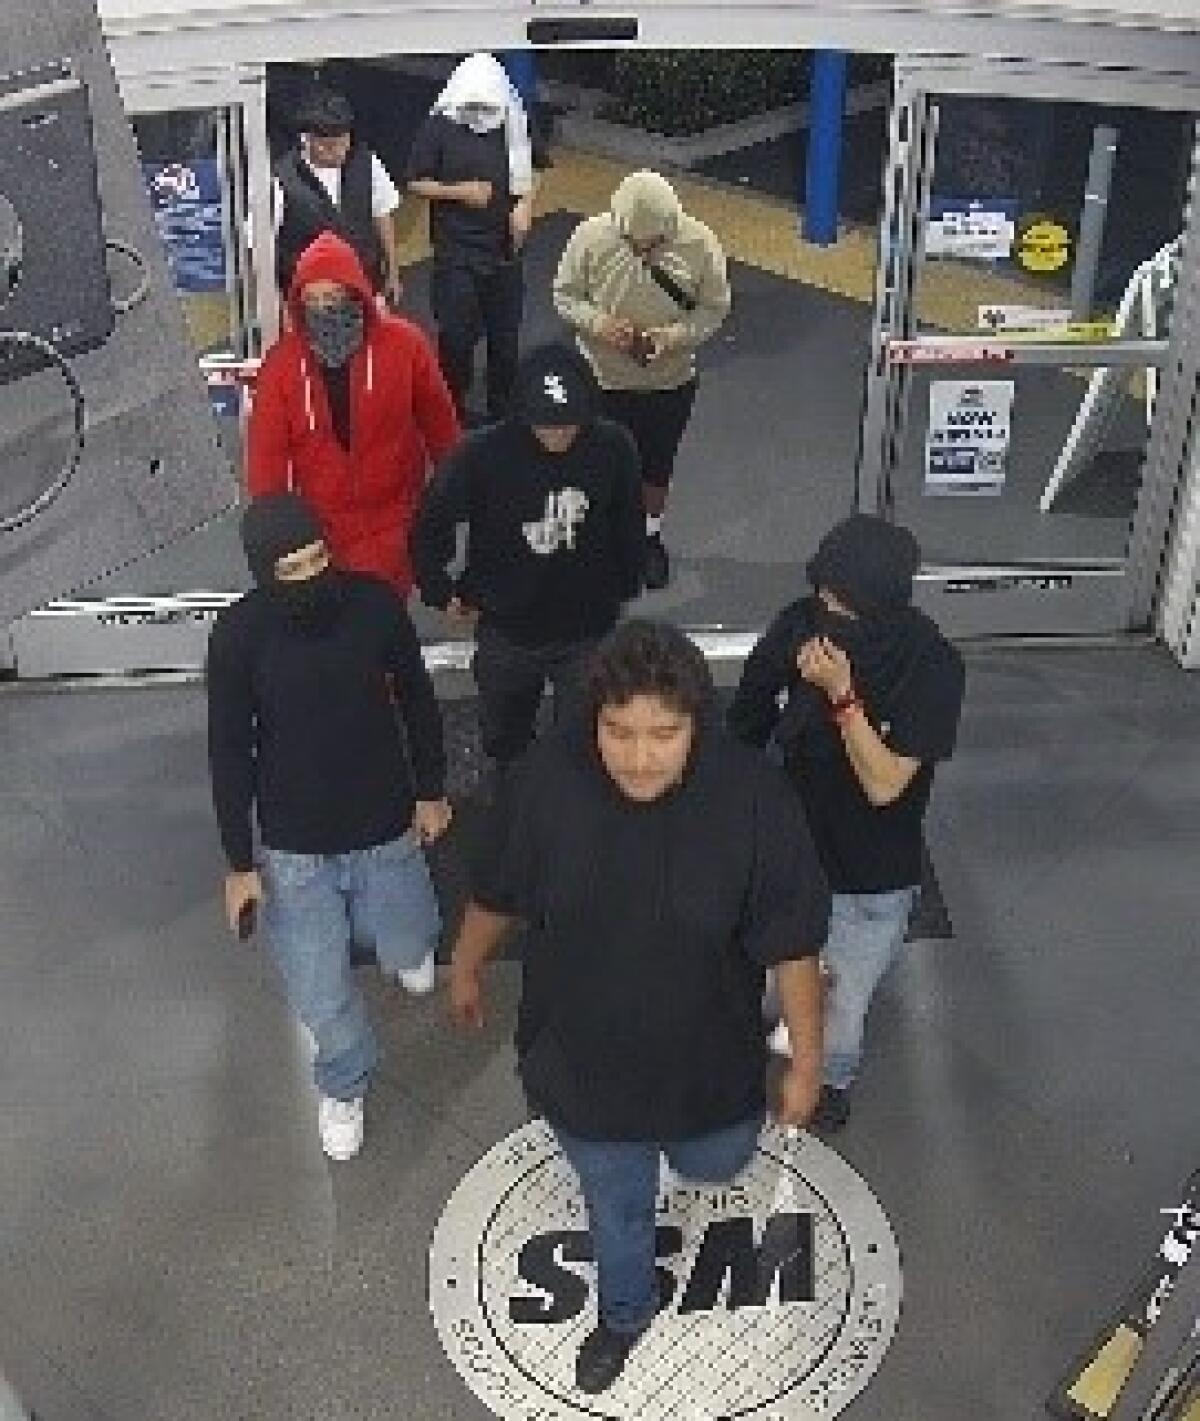 A group of young people, some with faces hidden, walk into a store in a frame from overhead security camera